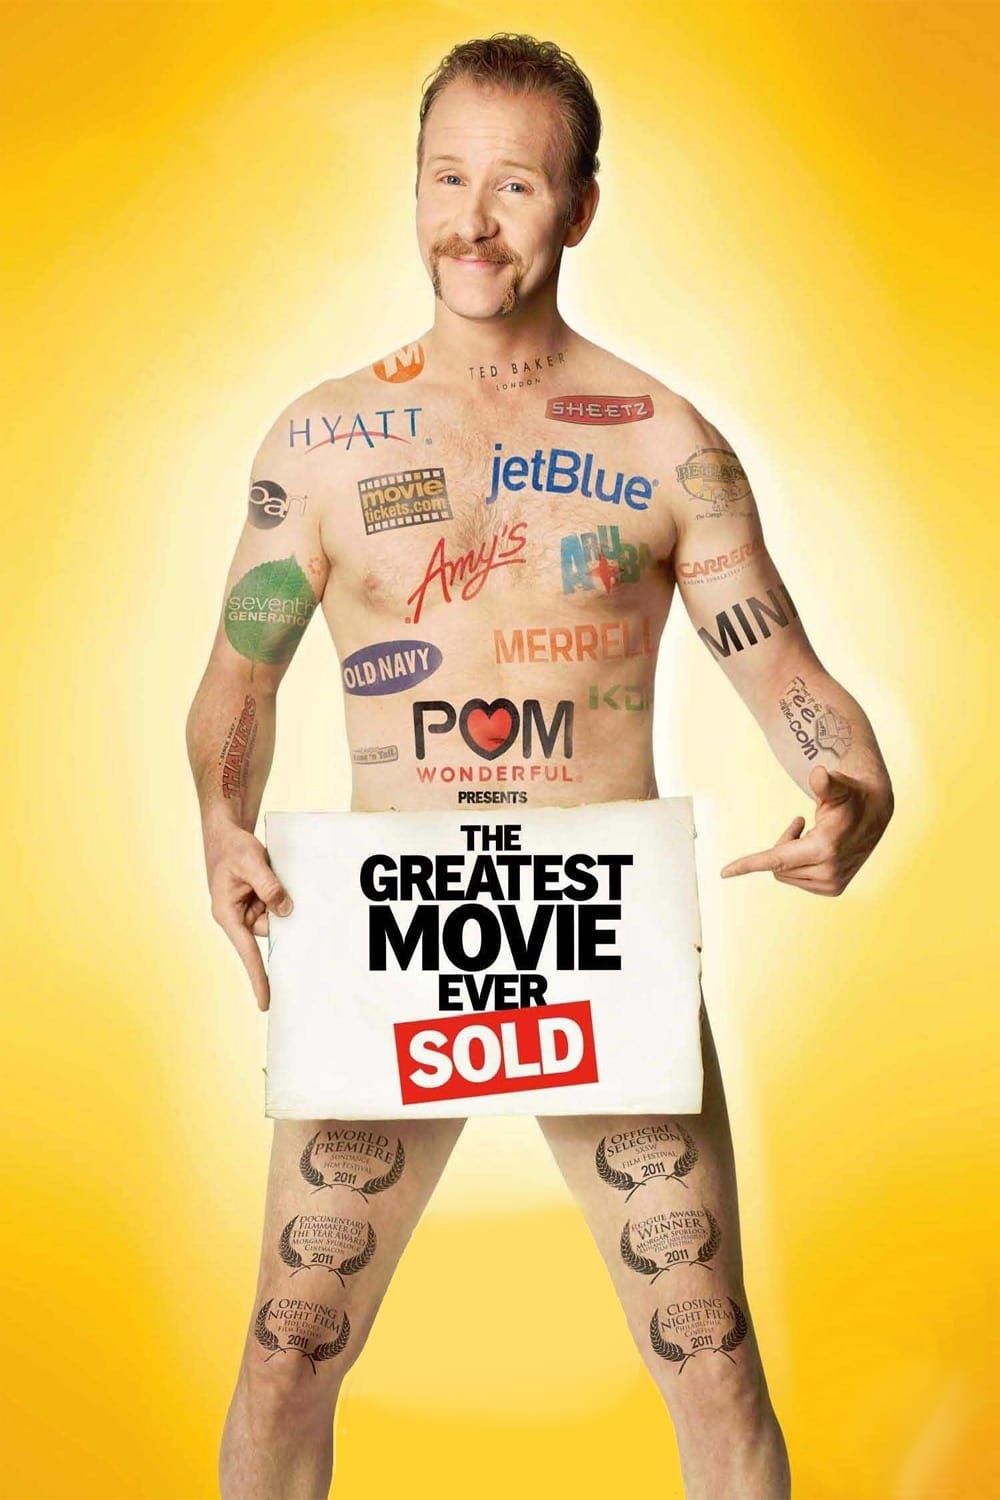 pom wonderful presents the greatest movie ever sold